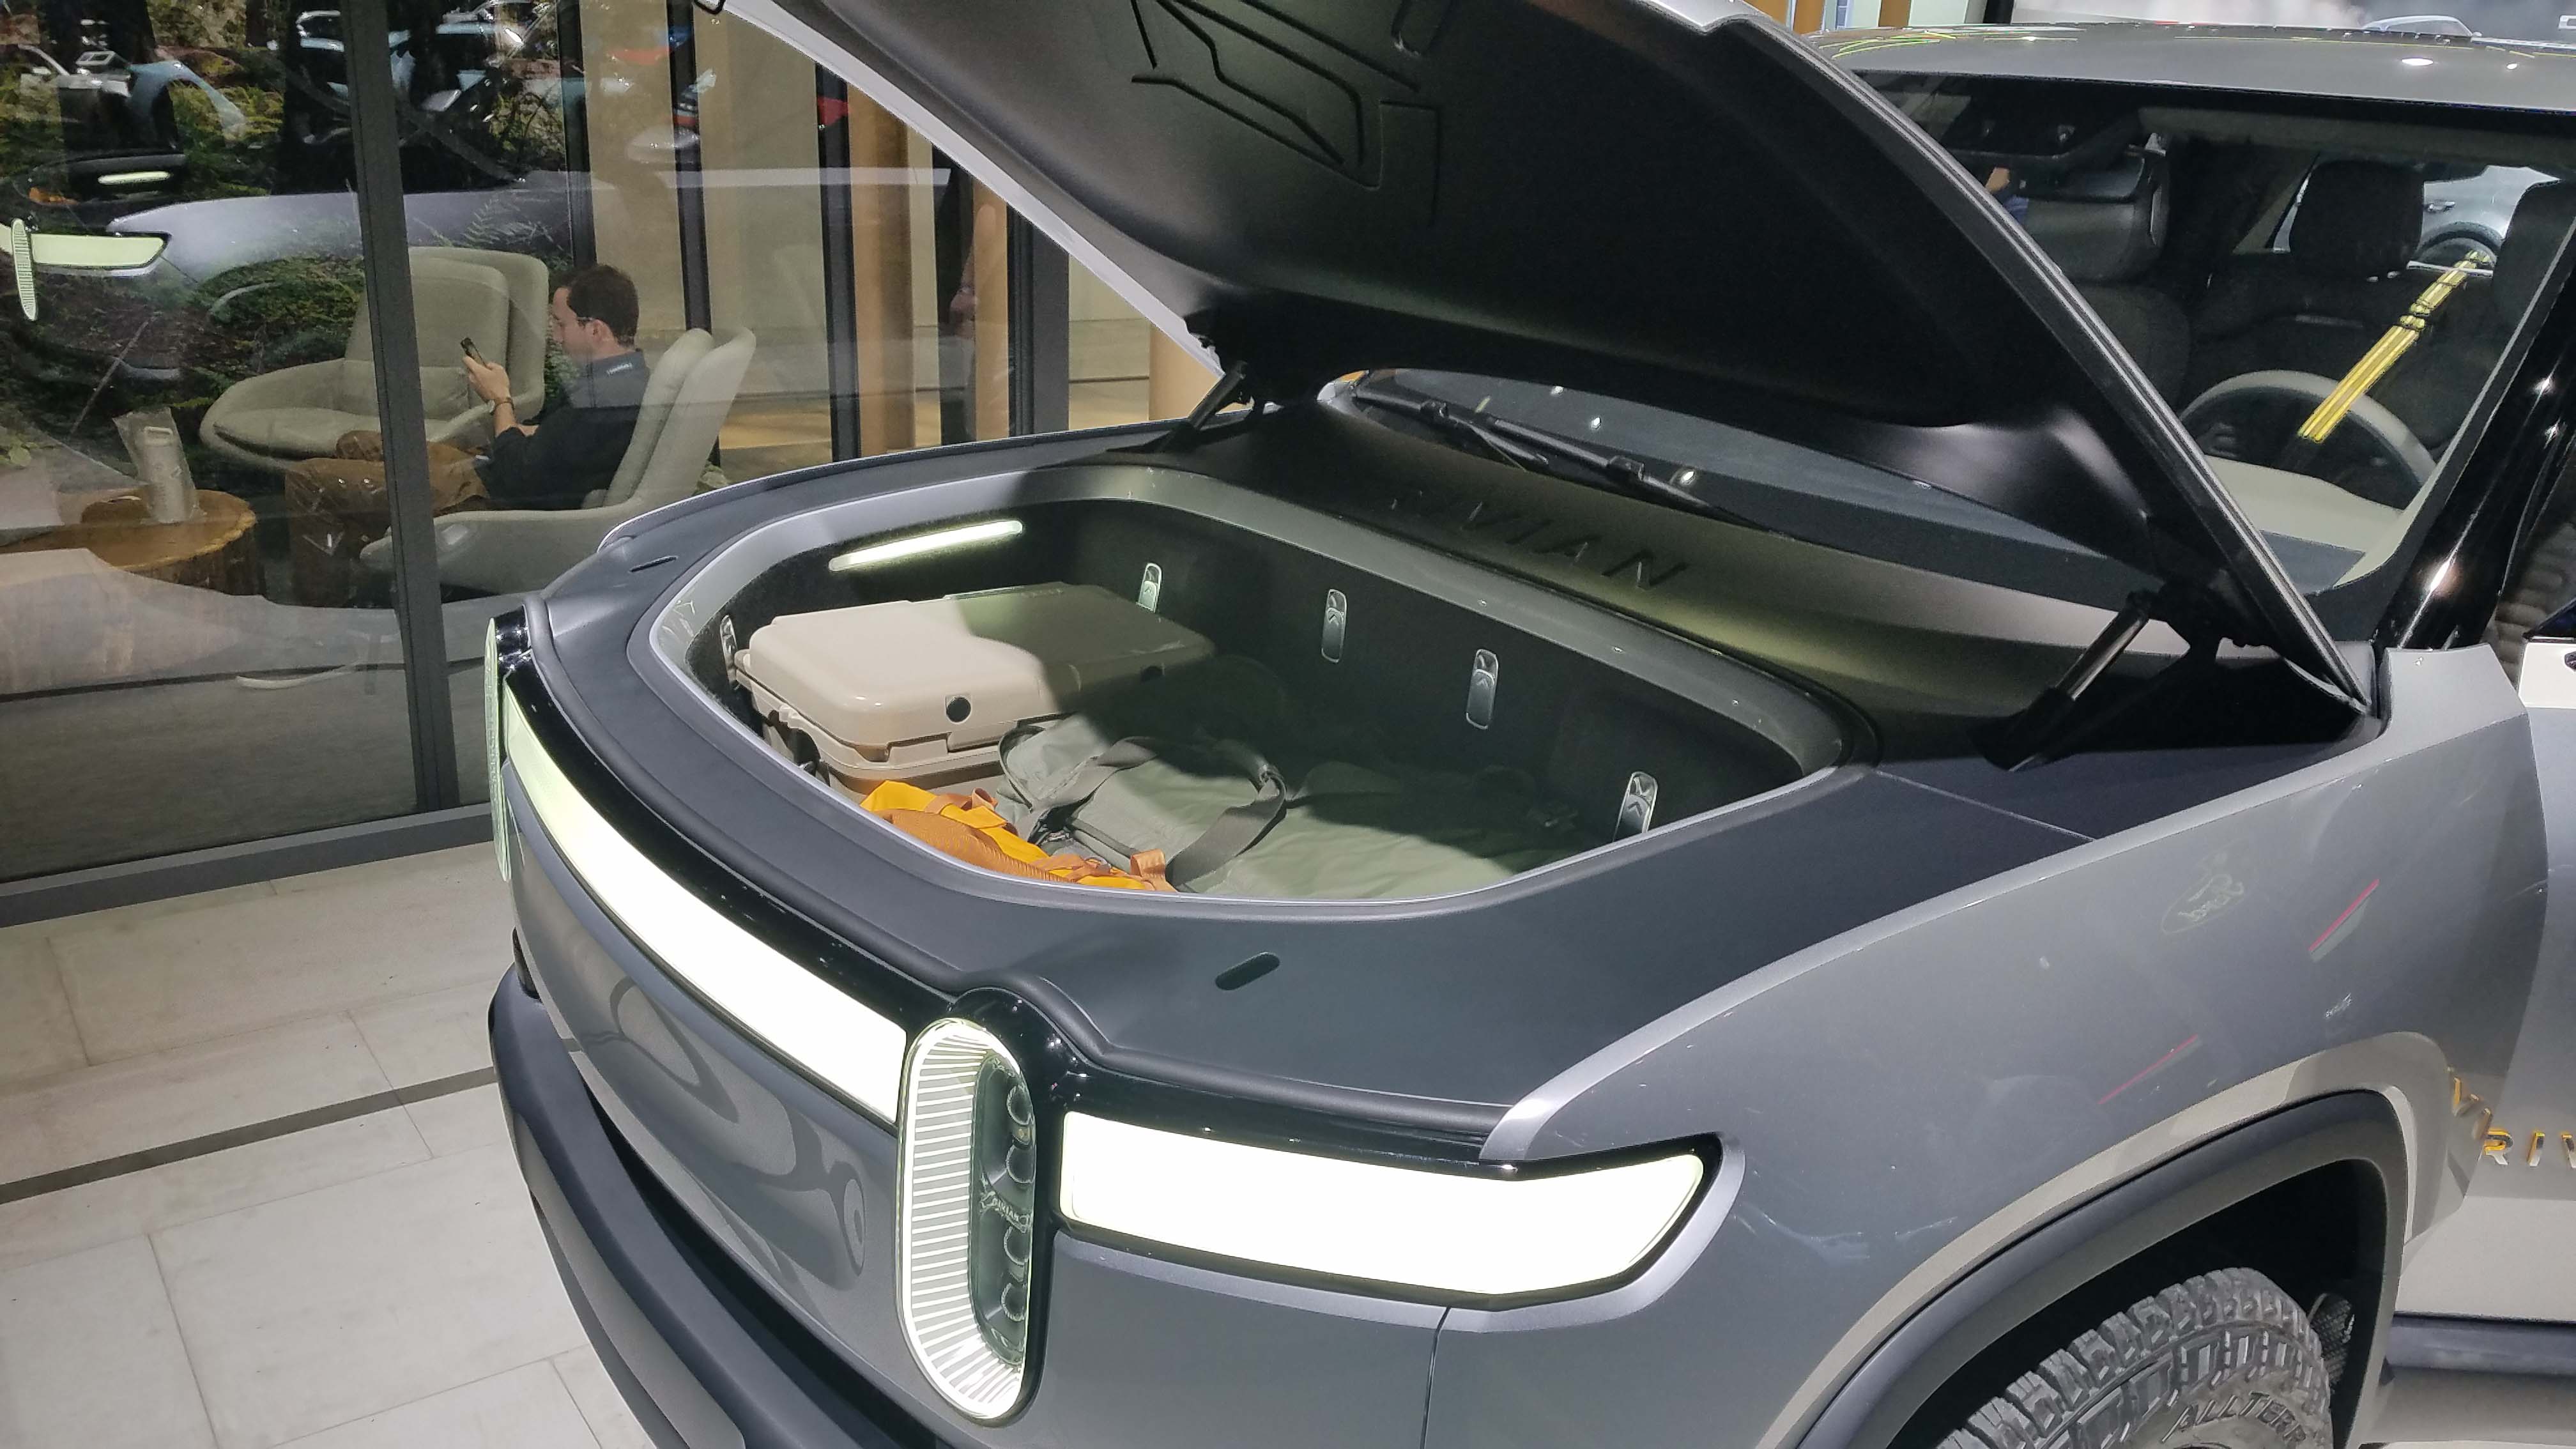 With its battery in the floor like a Tesla Model X SUV, the Rivian R1T boasts 12 cubic feet of storage space up front where a pickup's engine would normally be found.